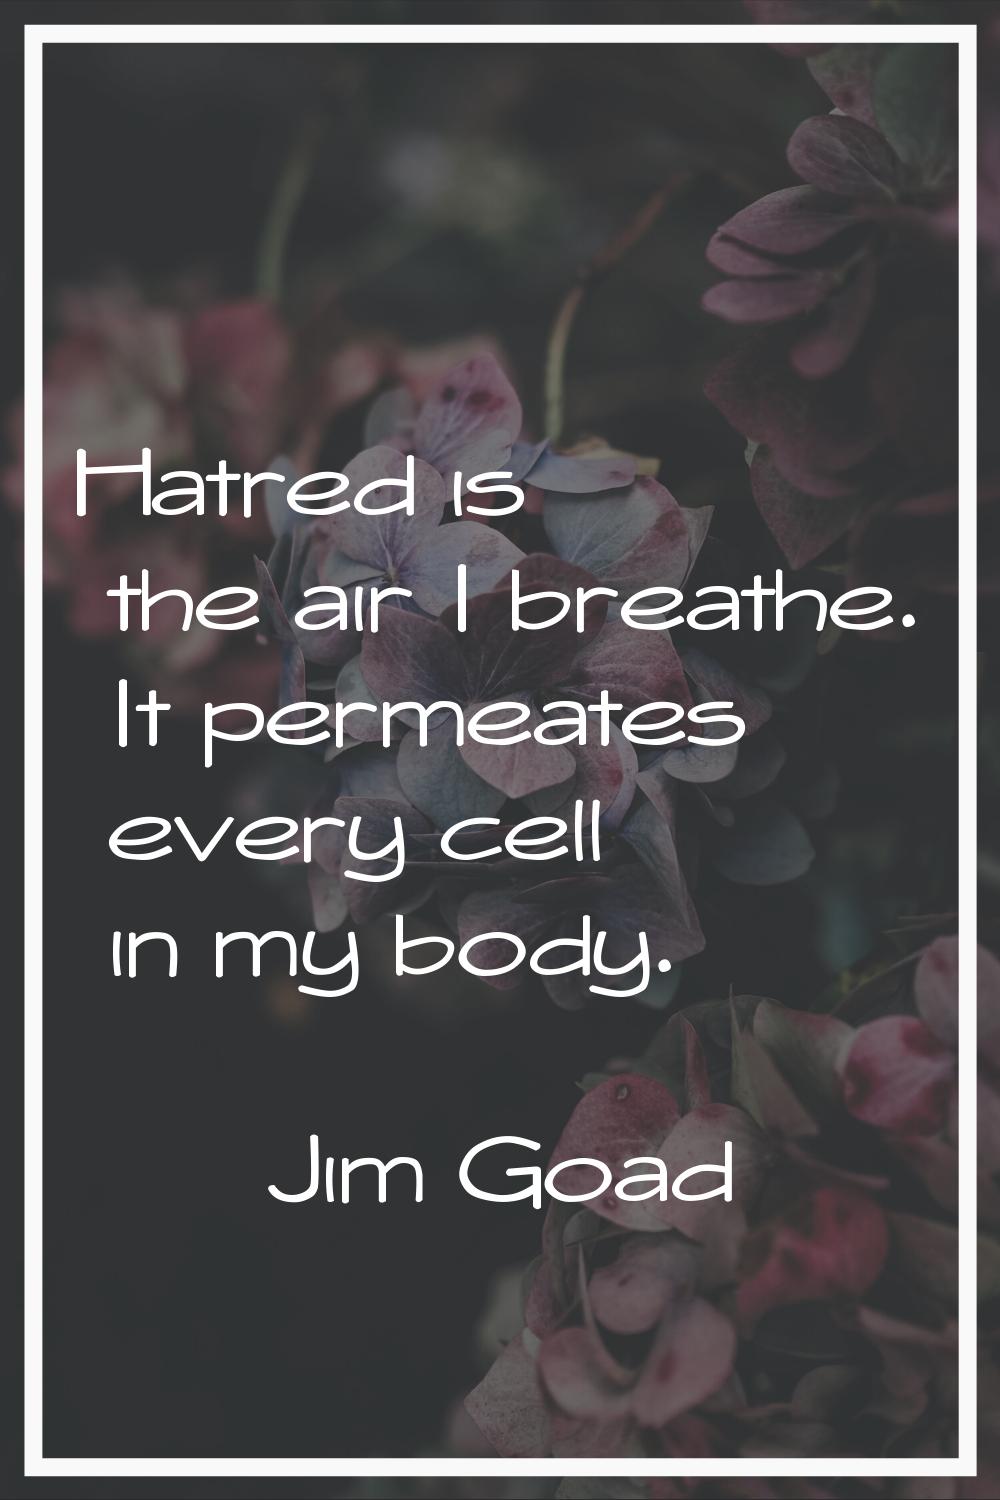 Hatred is the air I breathe. It permeates every cell in my body.